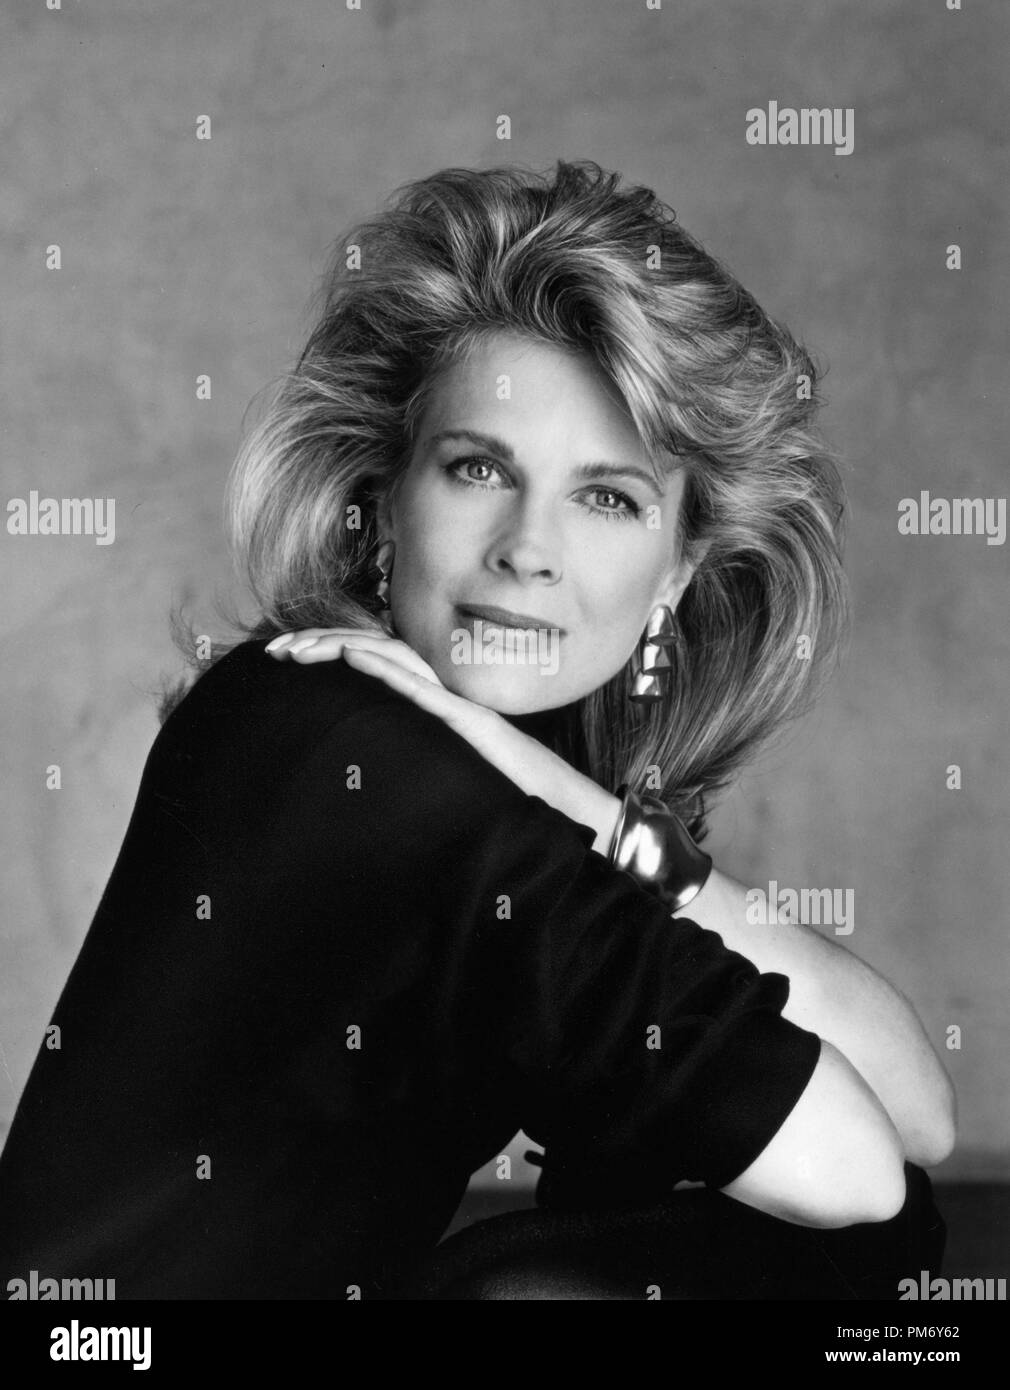 Candice bergen young pictures